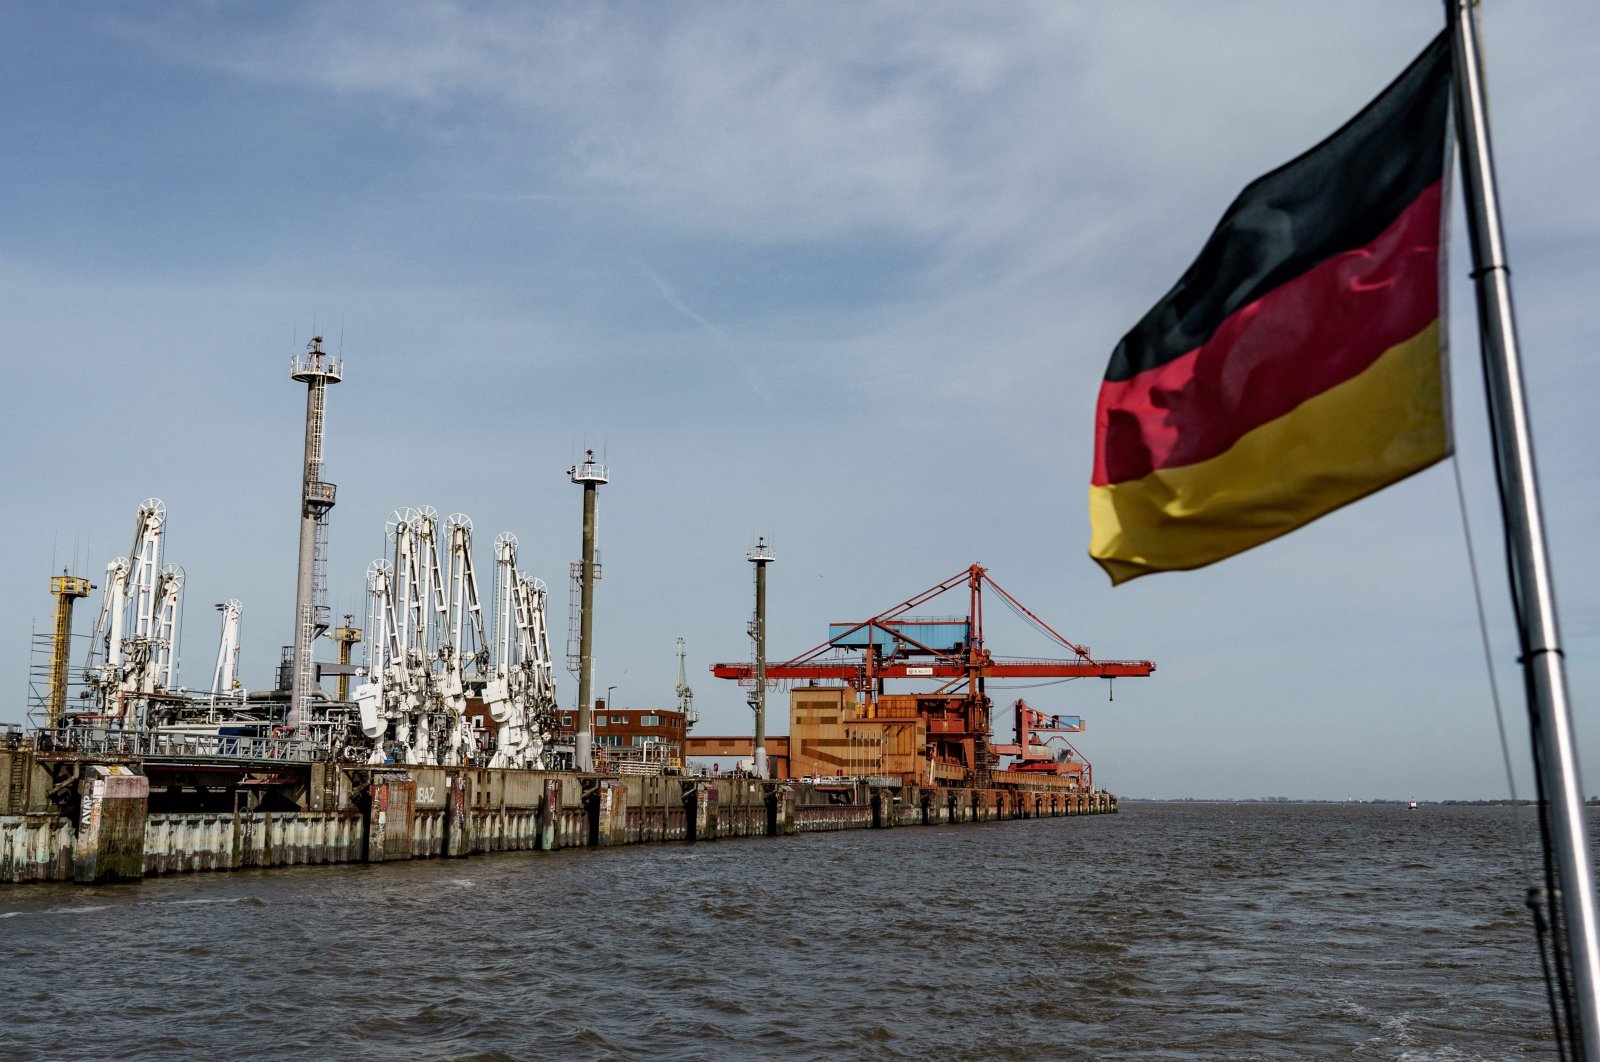 A German flag waves from the back of a ship in front of port facilities at the industrial harbor of Stade, on the river Elbe in northern Germany, April 12, 2022. (AFP Photo)